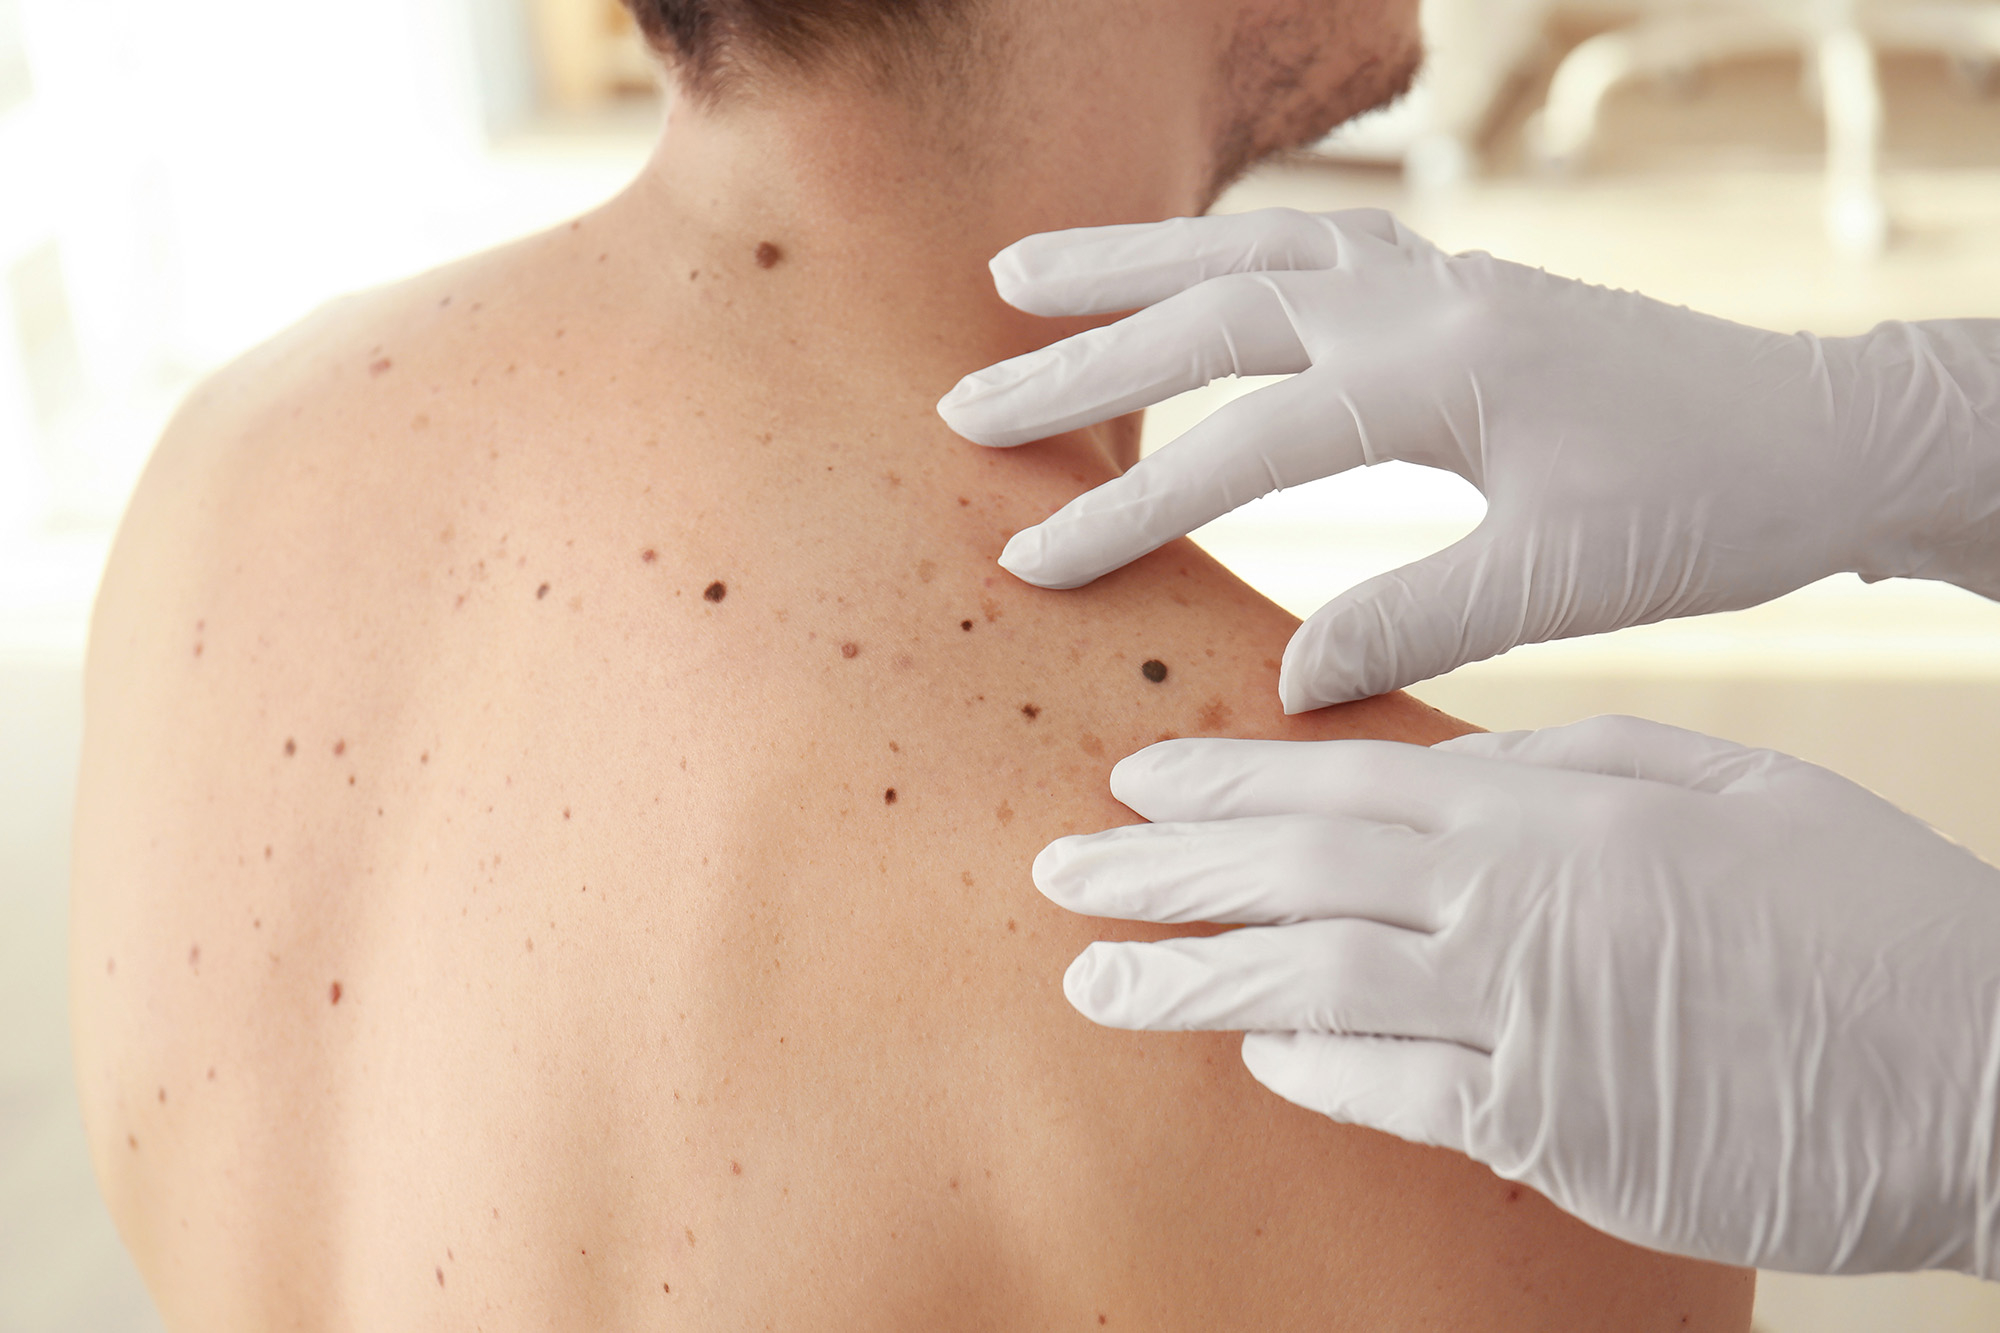 photo of moles on a person's back being checked by a health professional